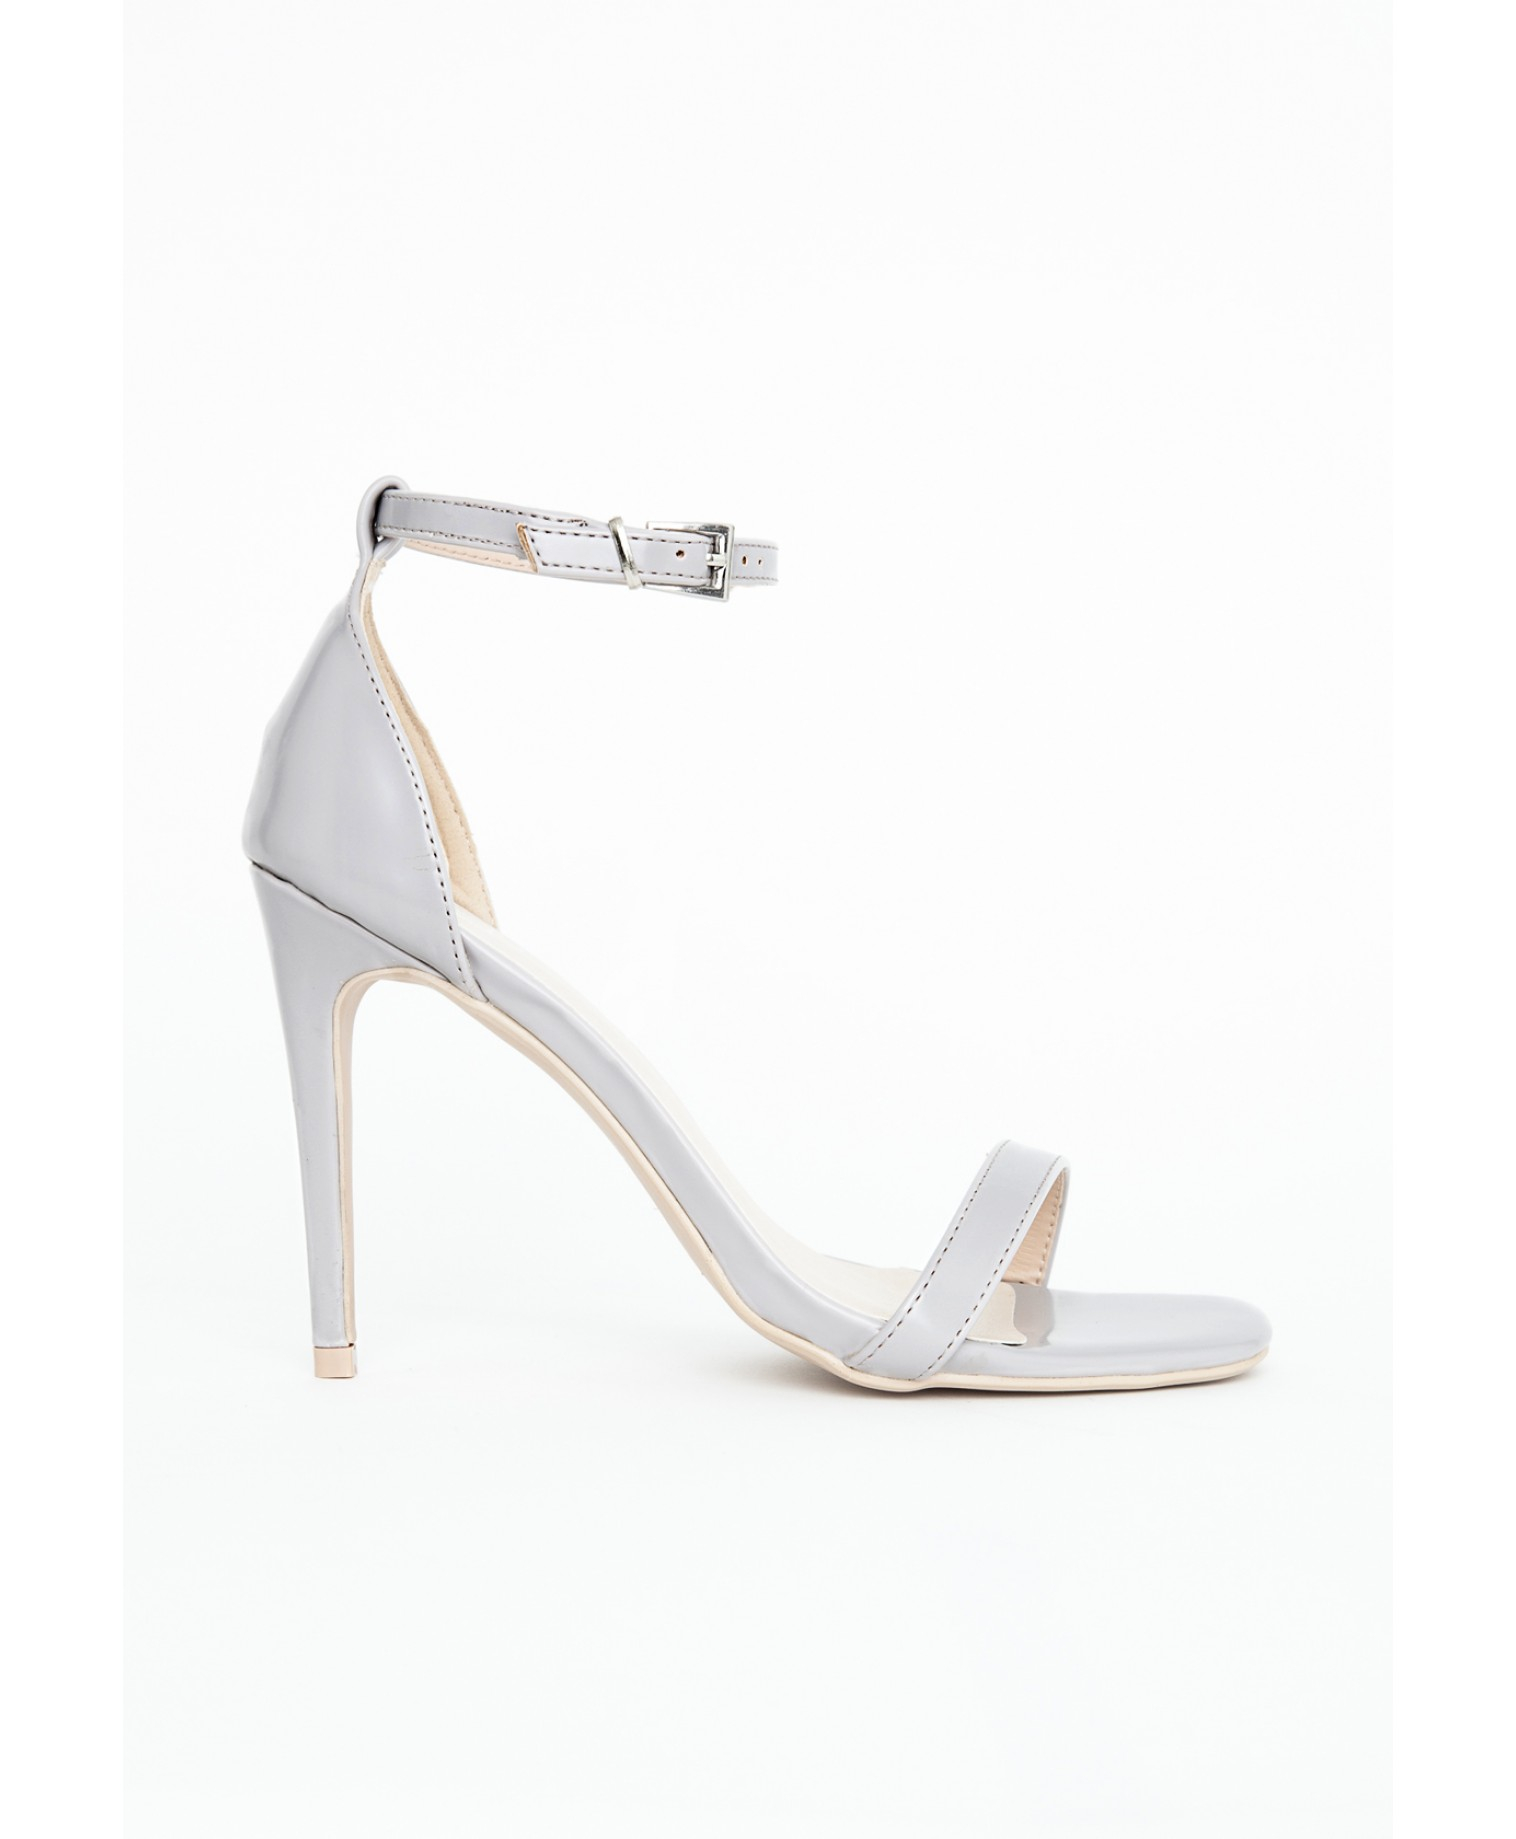 Missguided Clara Grey Strappy Heeled Sandals in Gray (grey) | Lyst